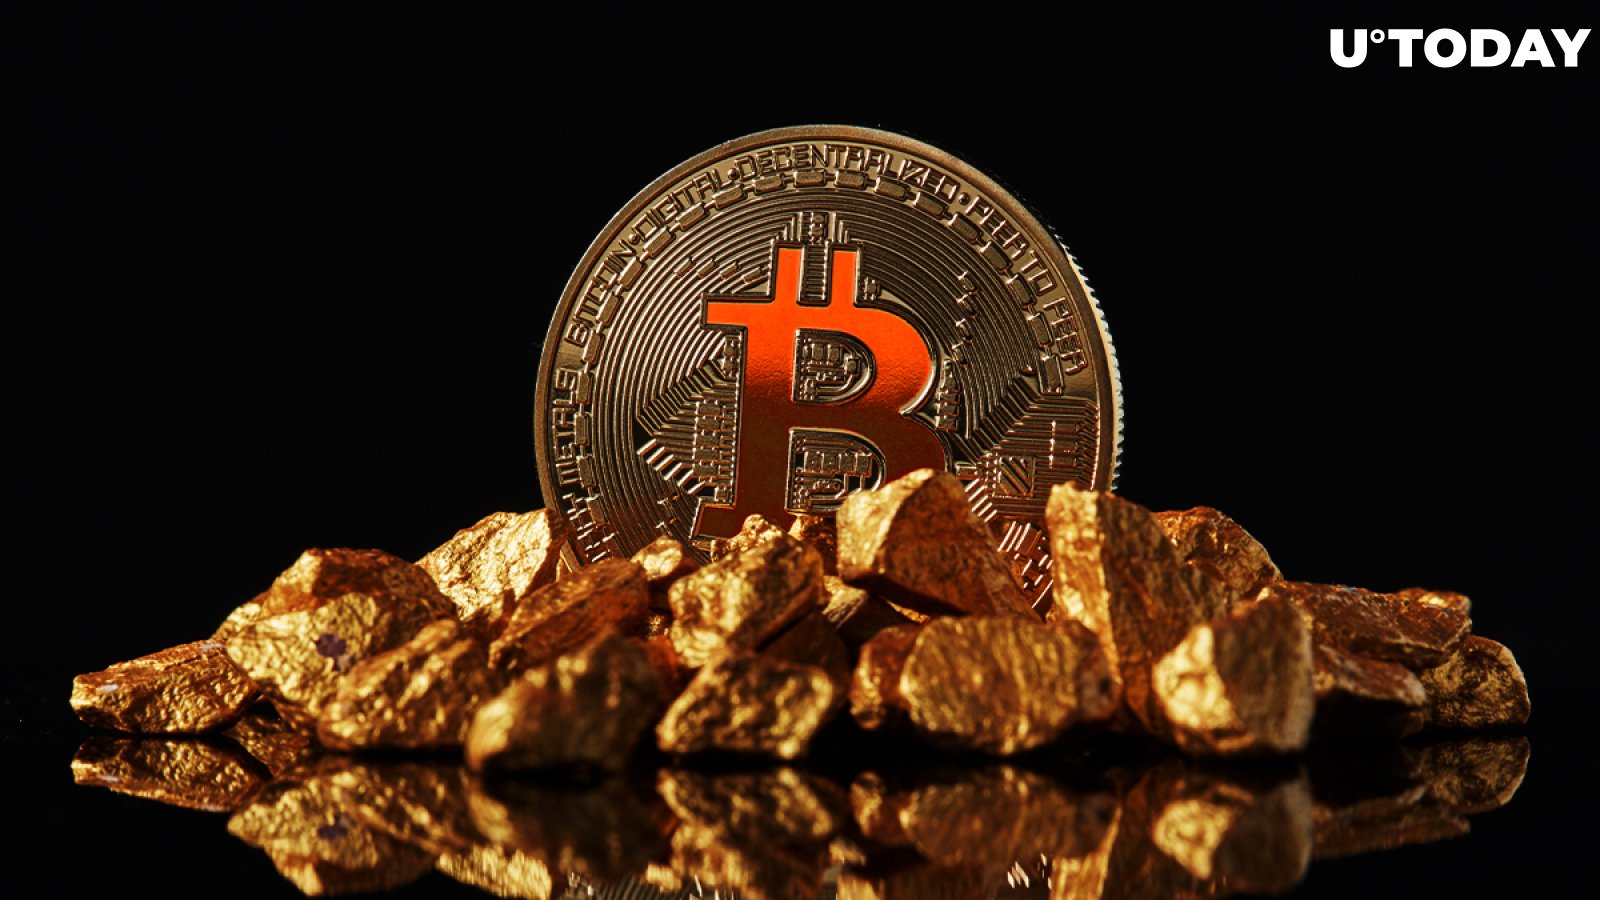 JPMorgan Says Institutions Ditching Gold ETFs for Bitcoin